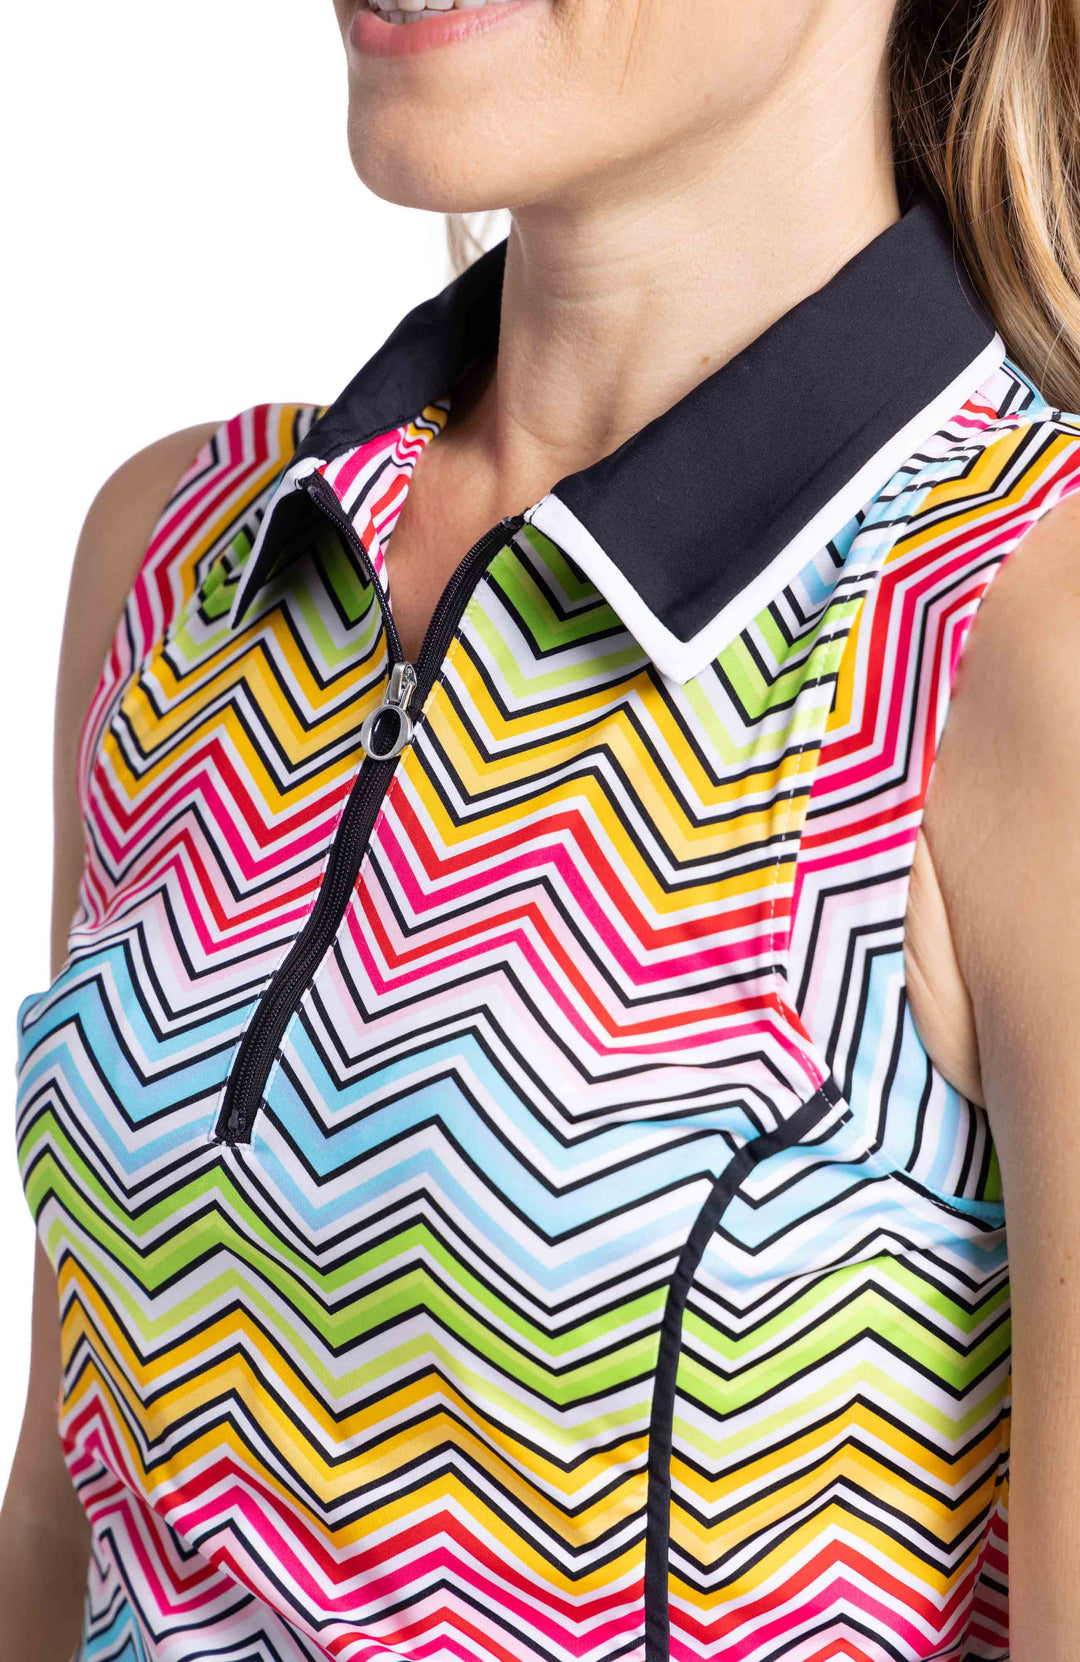 Close up shot of collar and front zip of TWILIGHT SLEEVELESS GOLF TOP - SUMMER HERRINGBONE pattern in light blue, green, yellow, pink and black